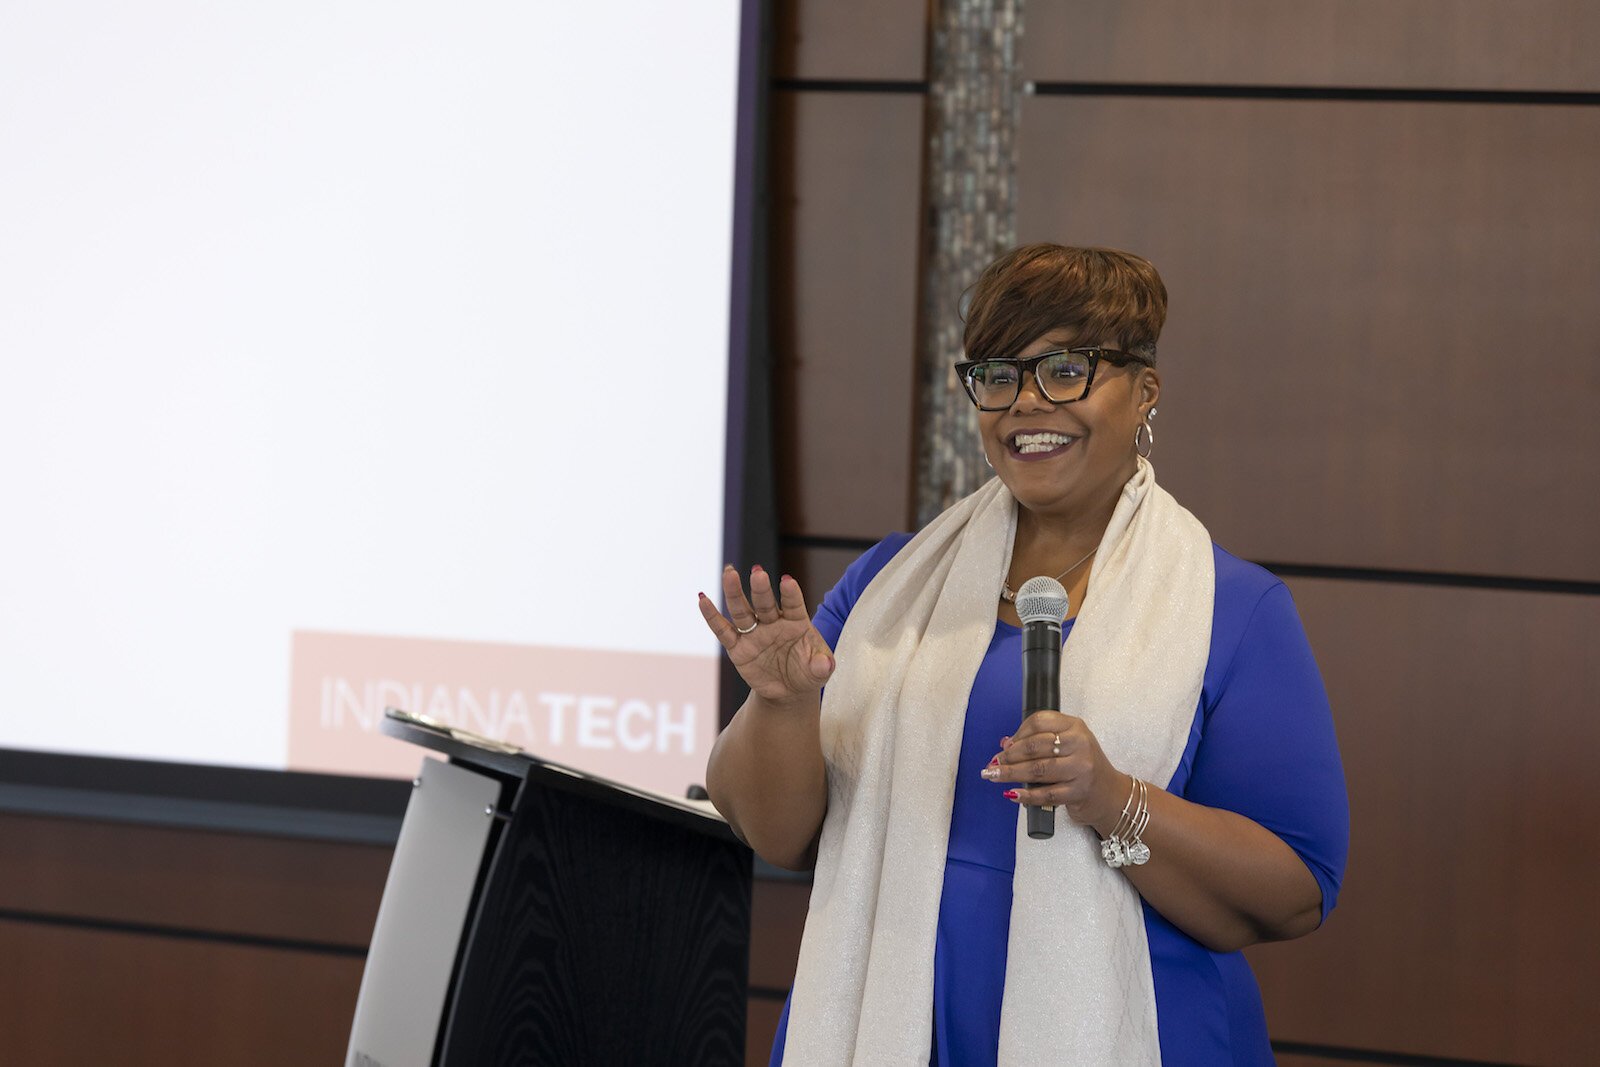 Lisa D. Givan is Vice President of Institutional Diversity, Equity, and Belonging as well as Senior Diversity Officer at Indiana Tech.